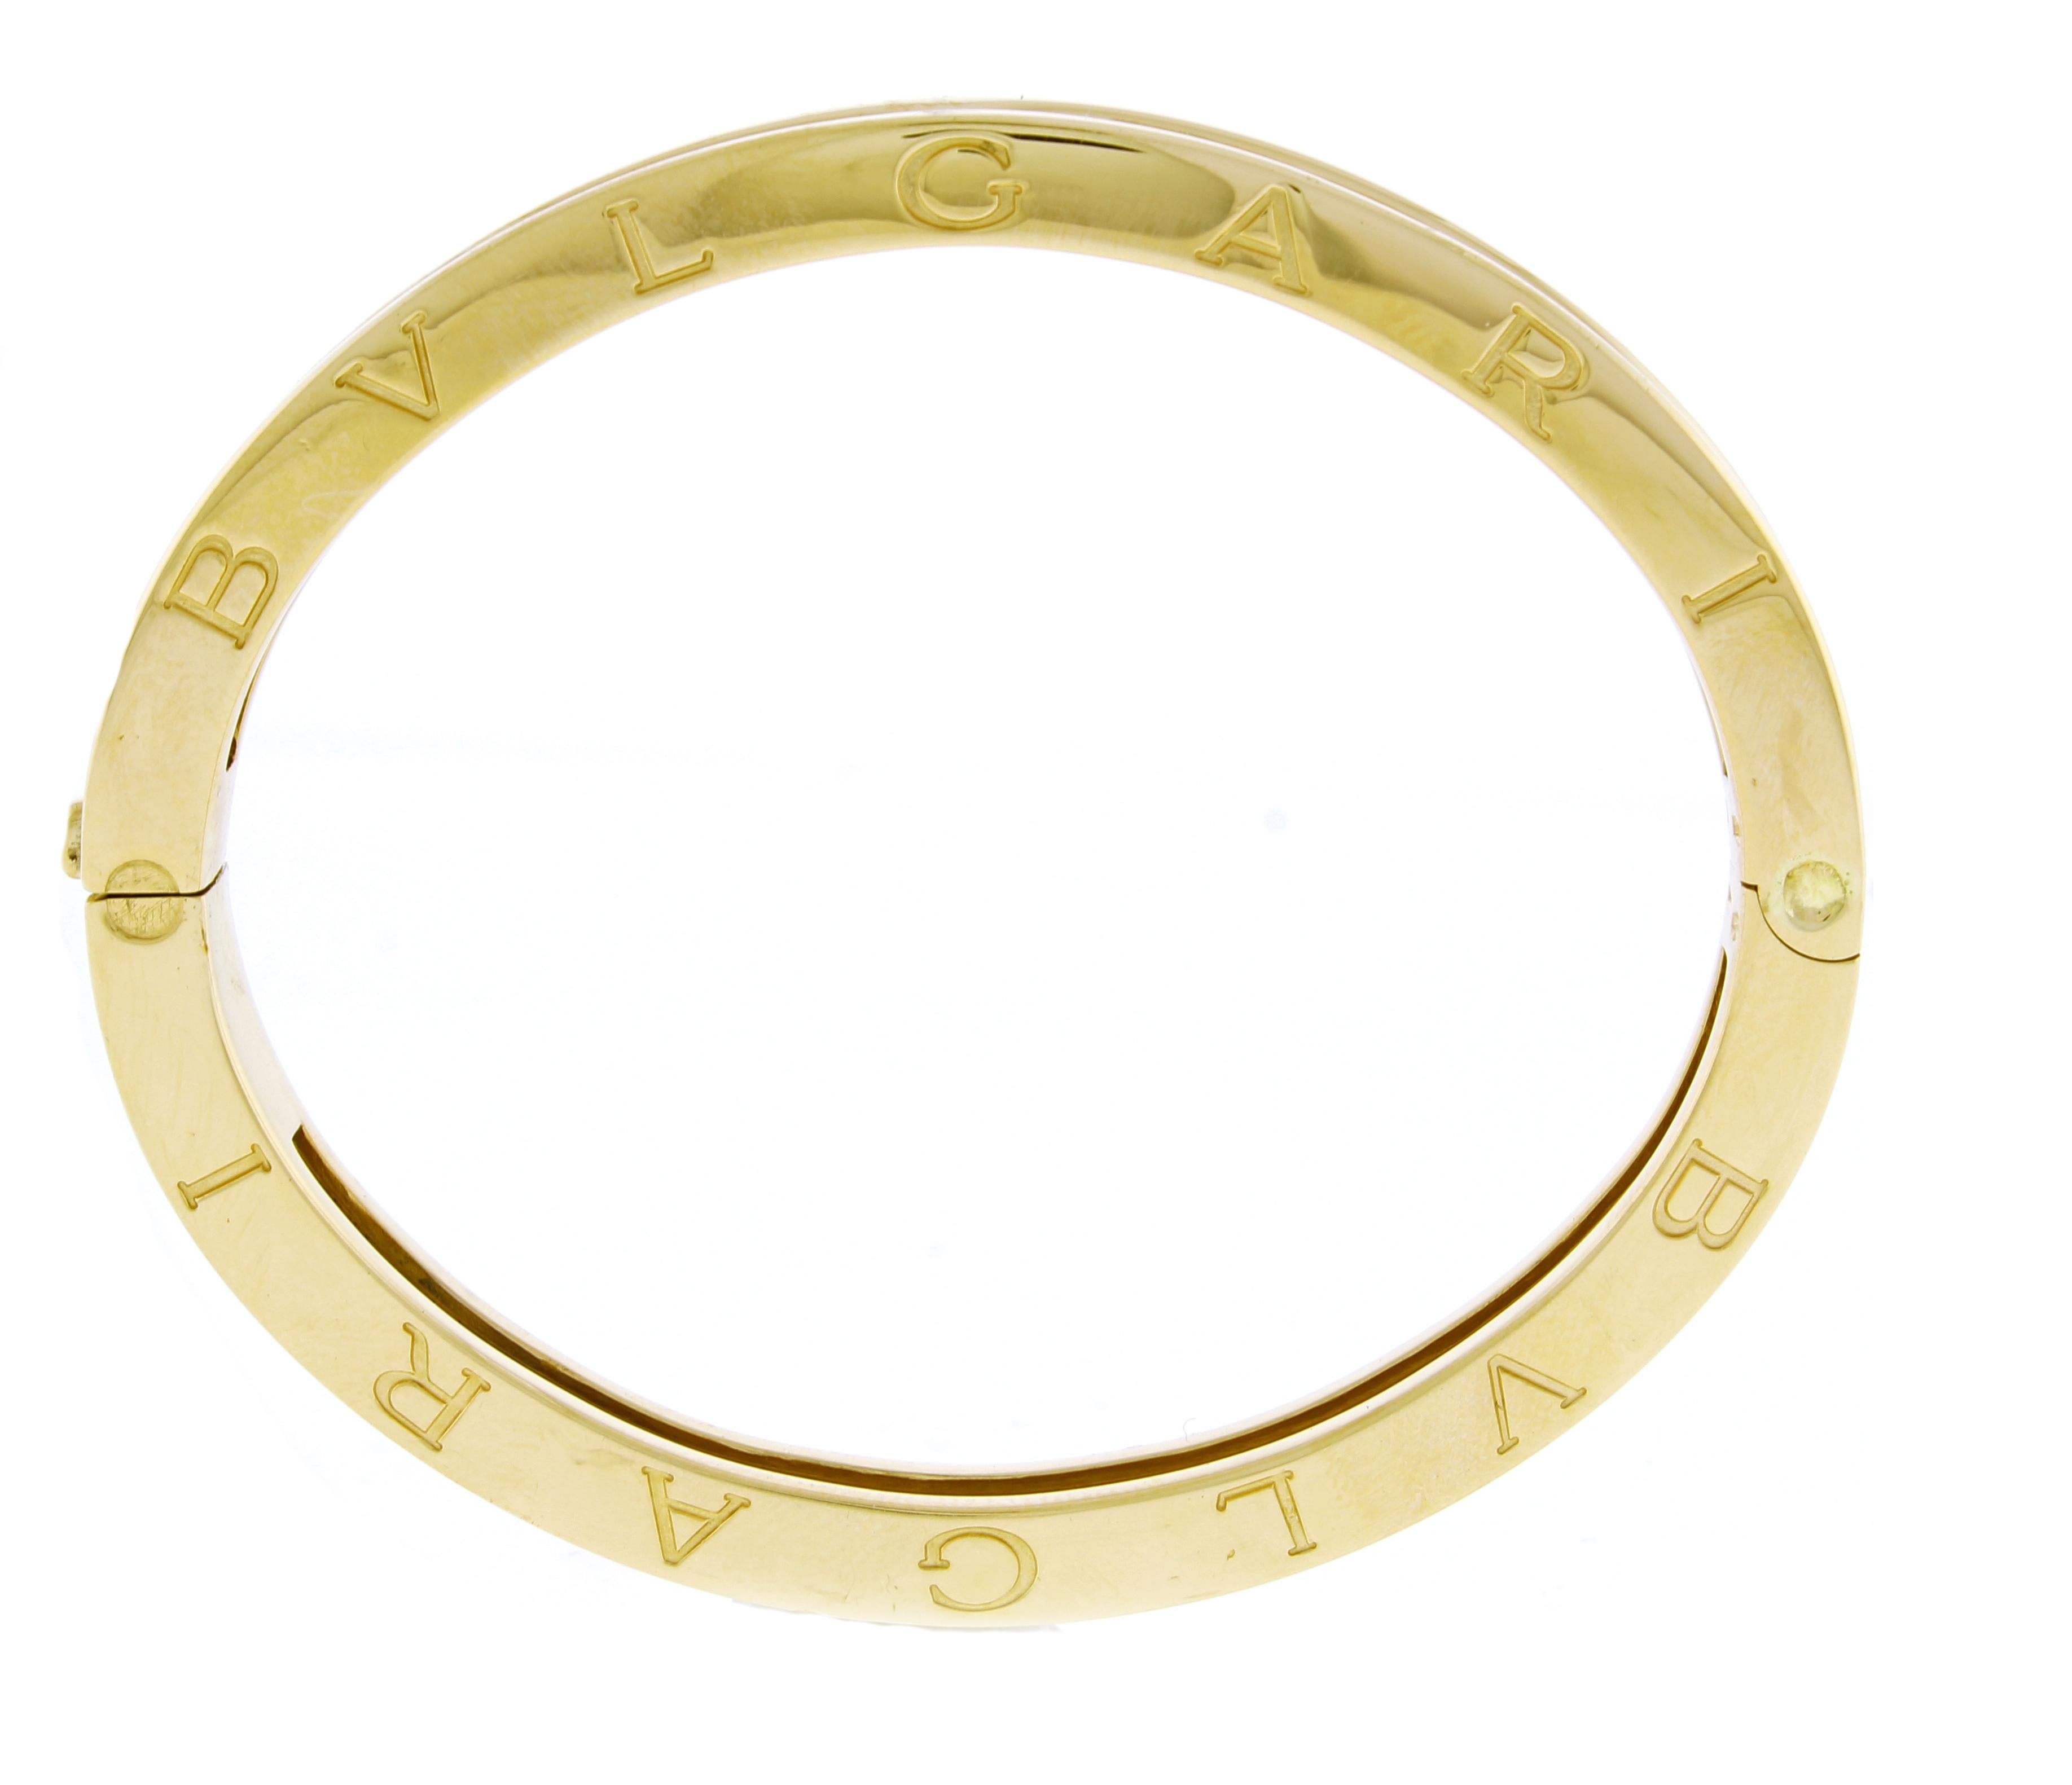 ♦ Designer: Bulgari
♦ Metal: 18 karat
♦ Circa 2010
♦ Size Medium fits 6-6½ wrist   16.5cm
♦ Packaging: Pampillonia presentation box 
♦ Condition: Excellent , pre-owned
♦ Price: Based on the market, prices are updated, guaranteeing the best and most